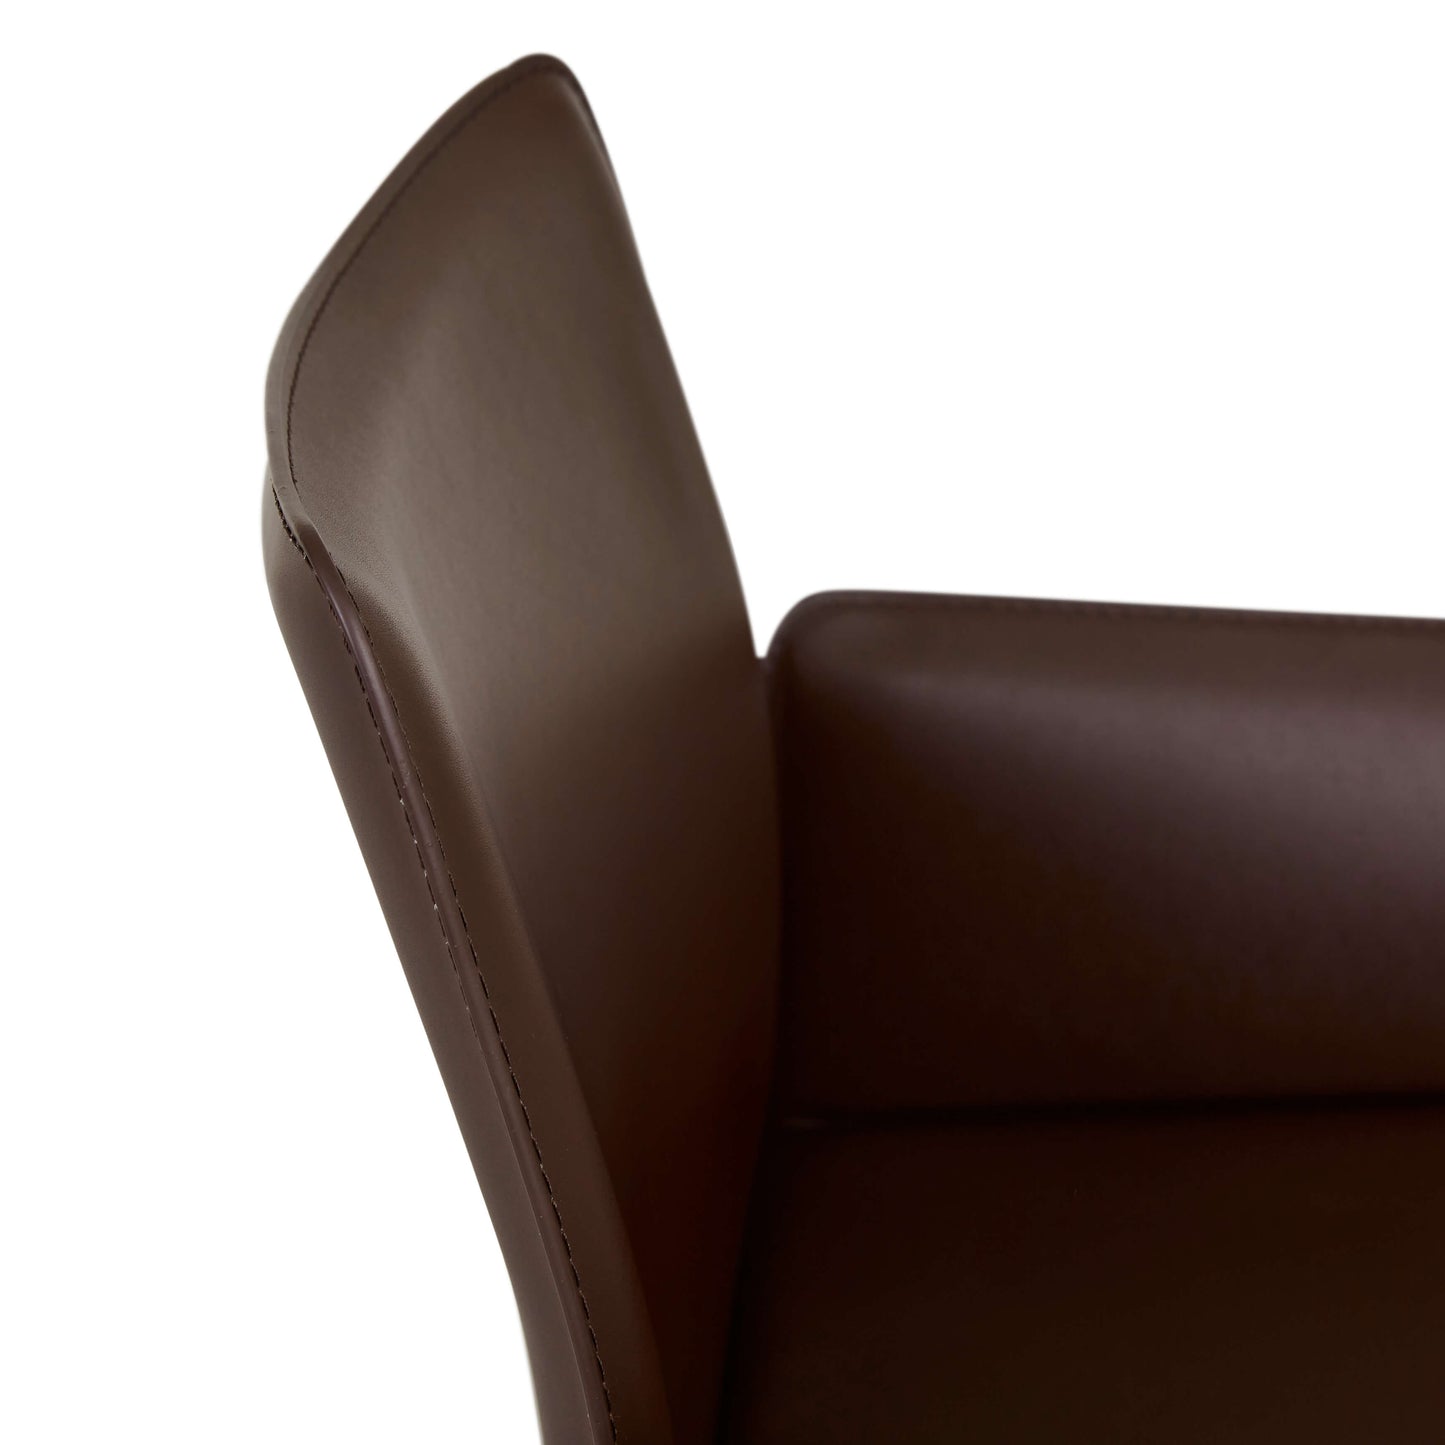 Lachlan | Contemporary Recycled Leather Dining Chair With Arms | Burgundy